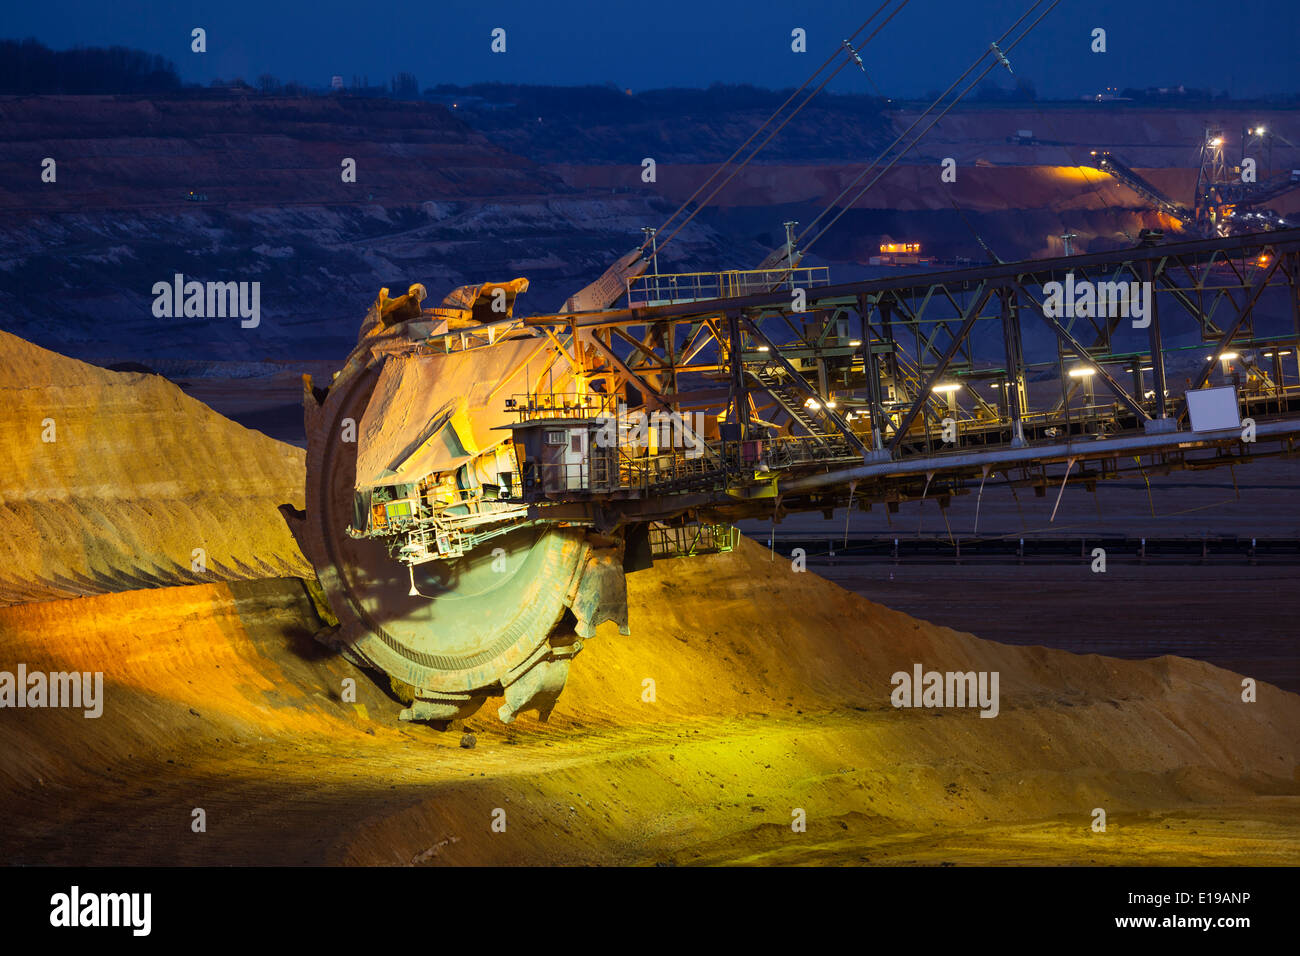 A giant Bucket Wheel Excavator in a lignite pit mine at night Stock Photo